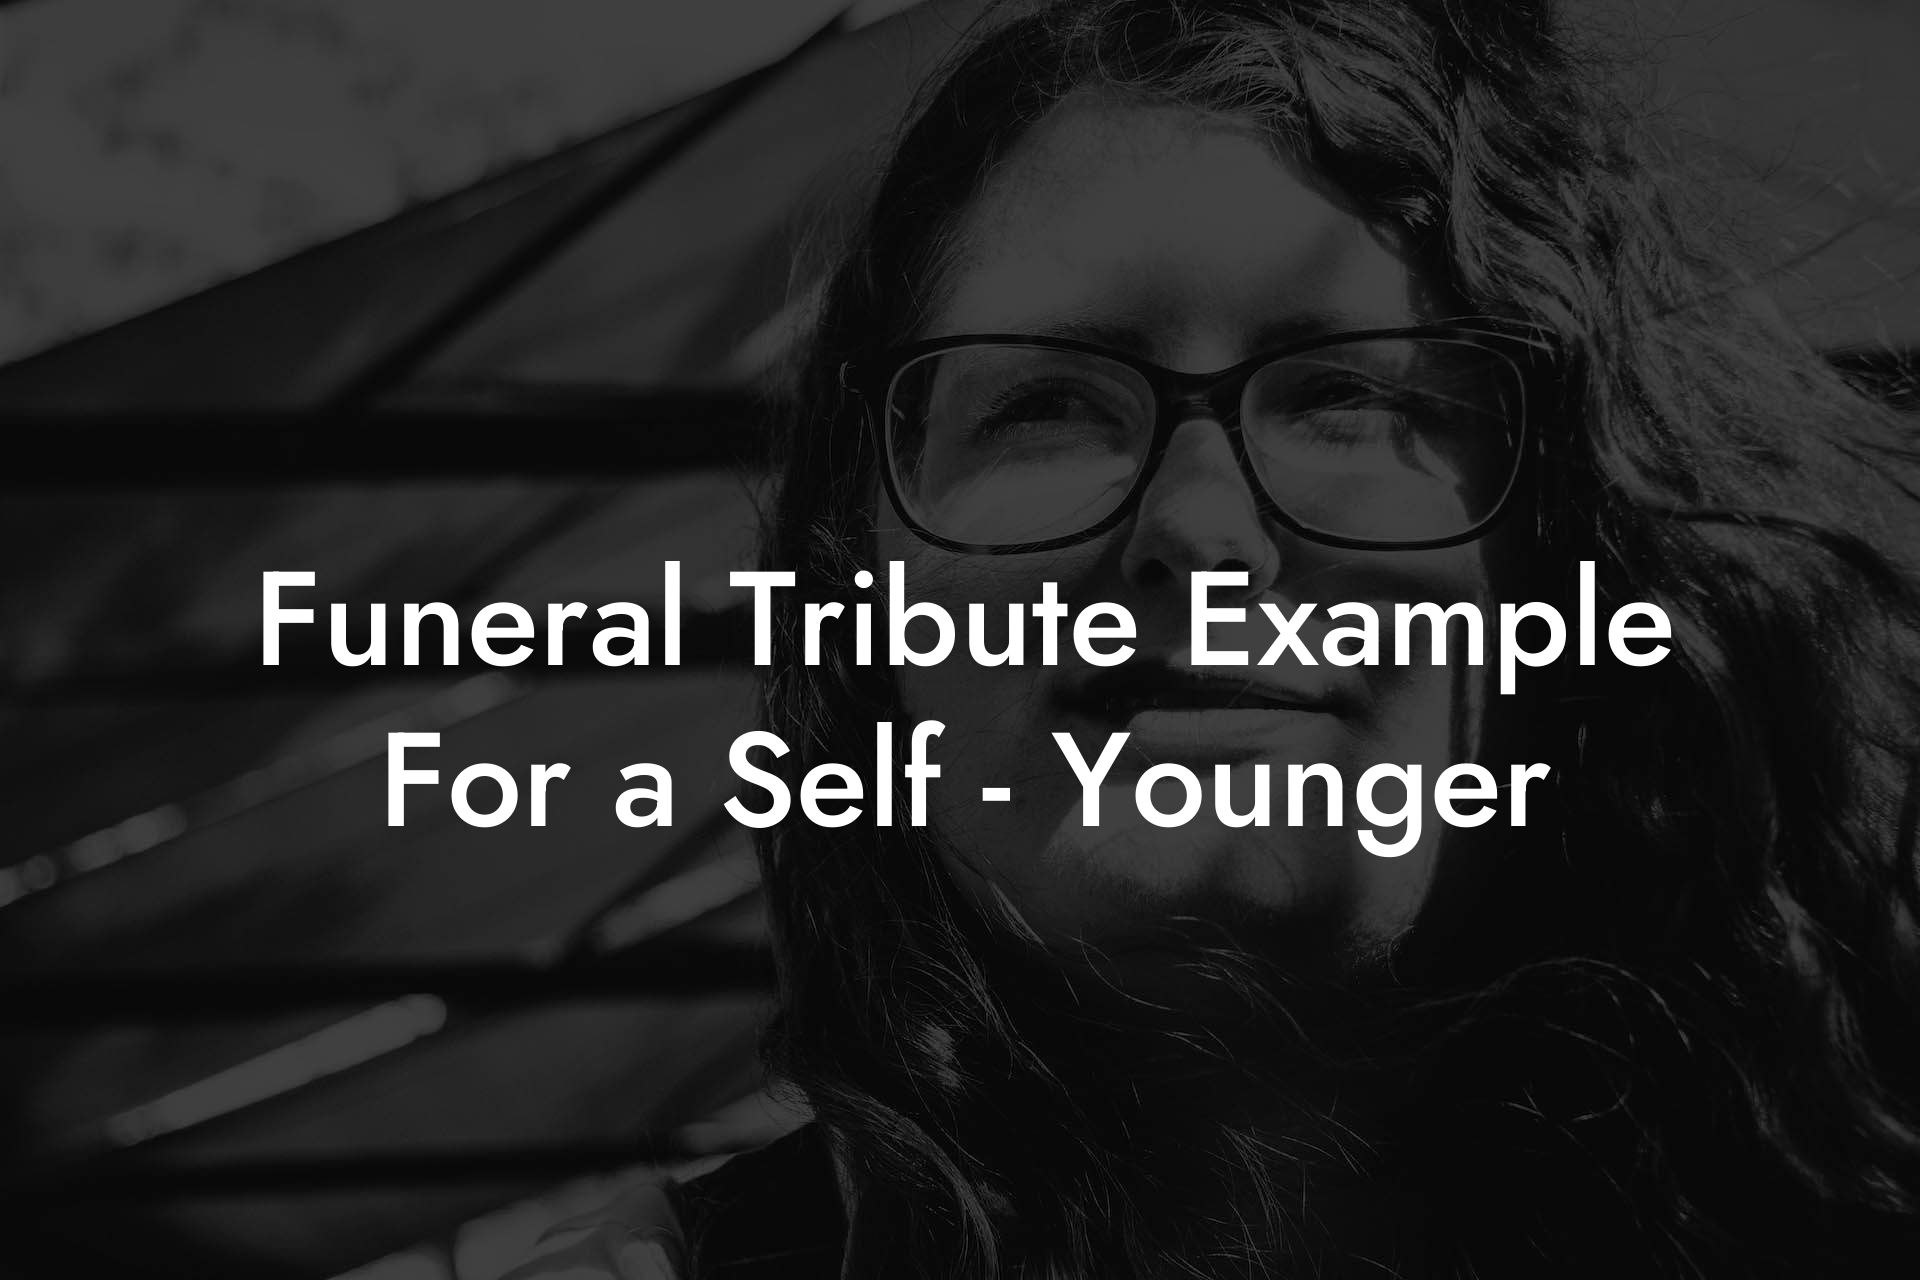 Funeral Tribute Example For a Self - Younger